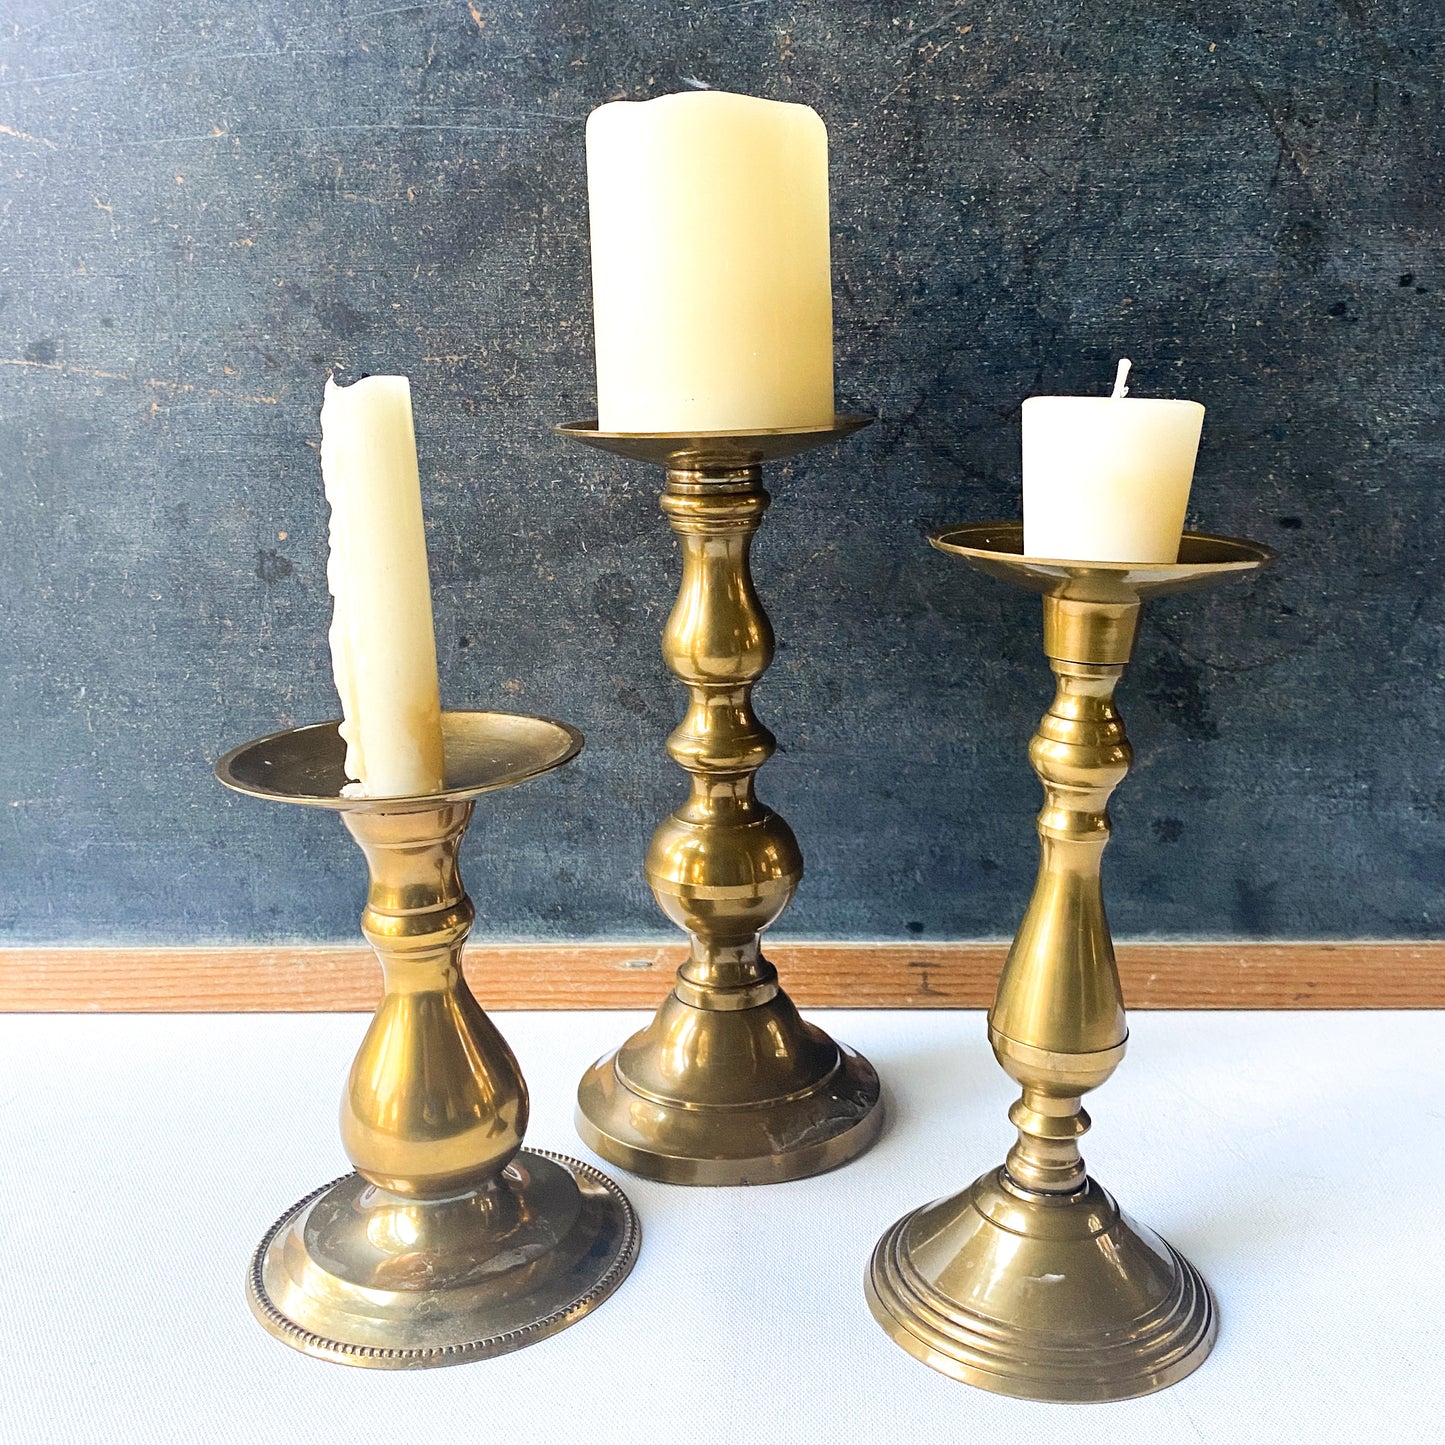 Vintage Brass Candle Holders, Taper or Pillar Candle Trio